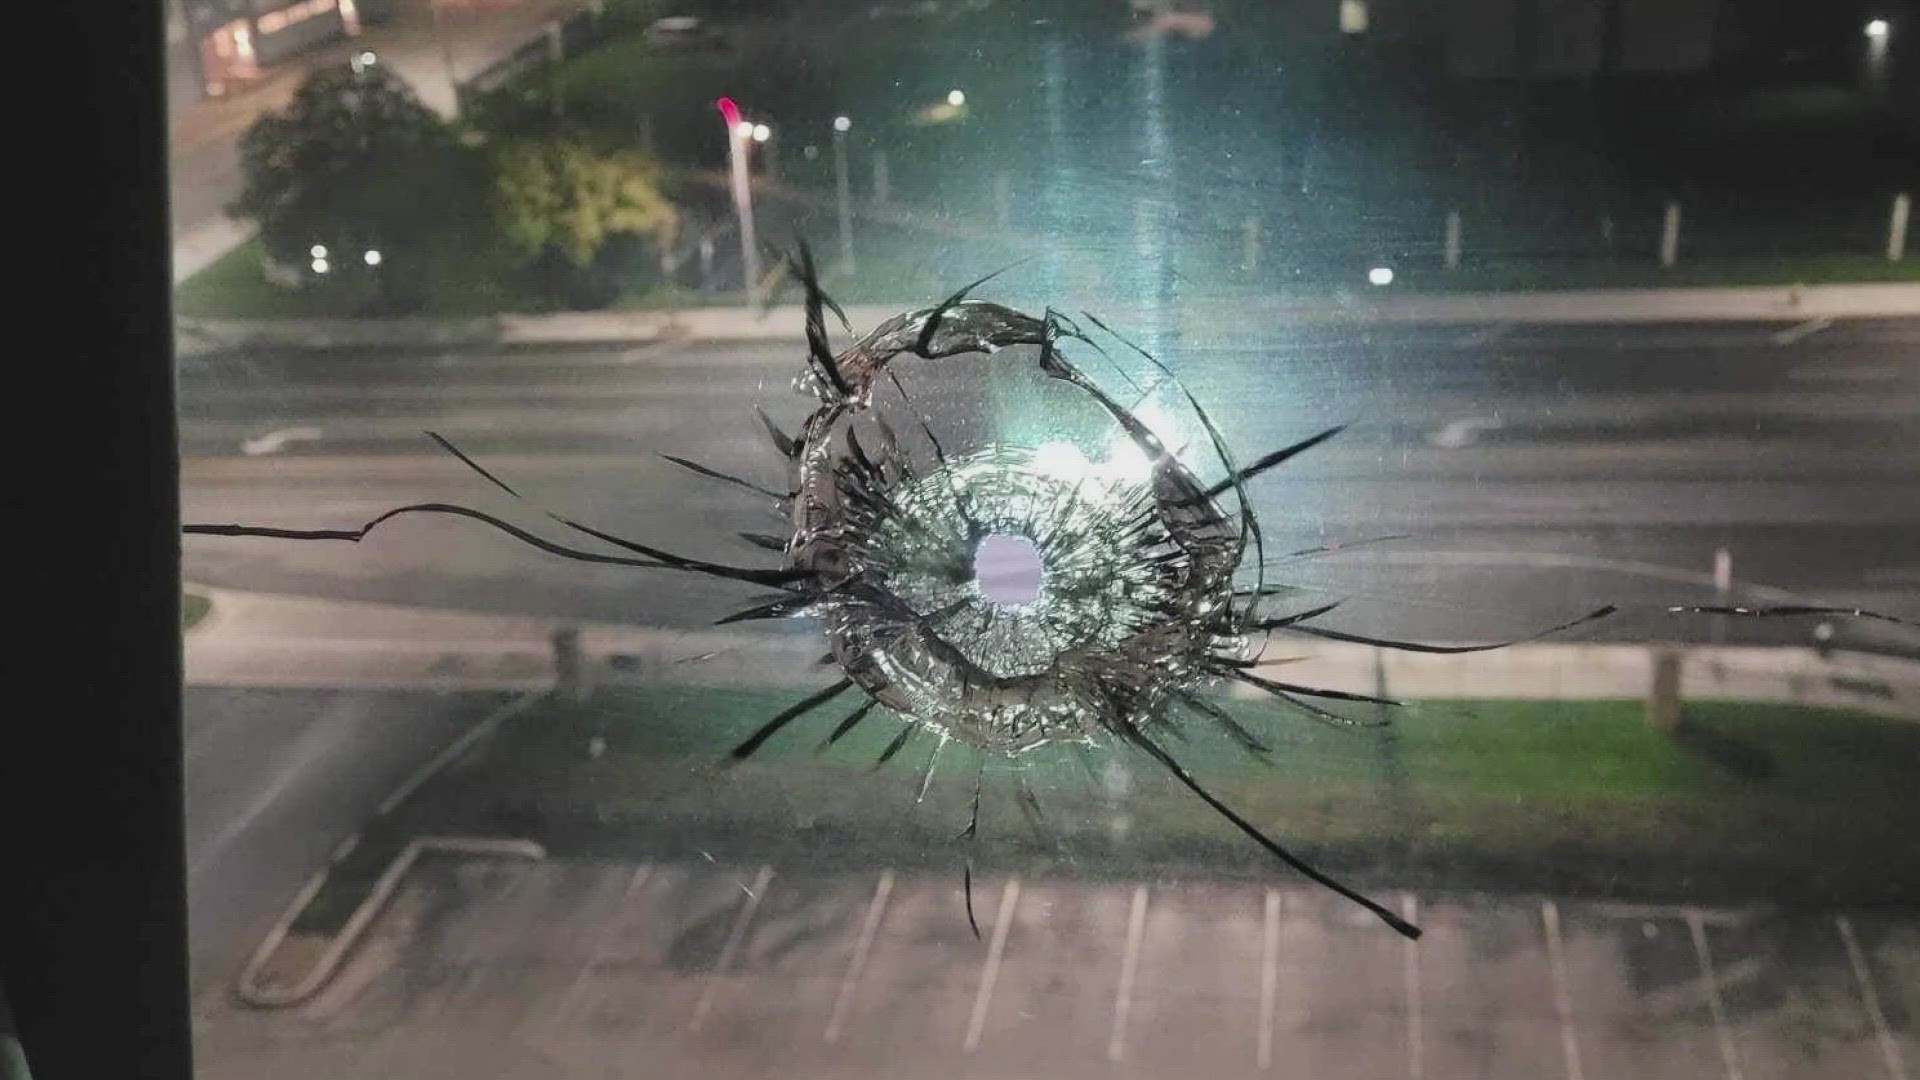 The St. Louis couple spoke to 5 On Your Side about a frightening night at a downtown hotel. They woke up to a bullet that flew through their hotel room window.